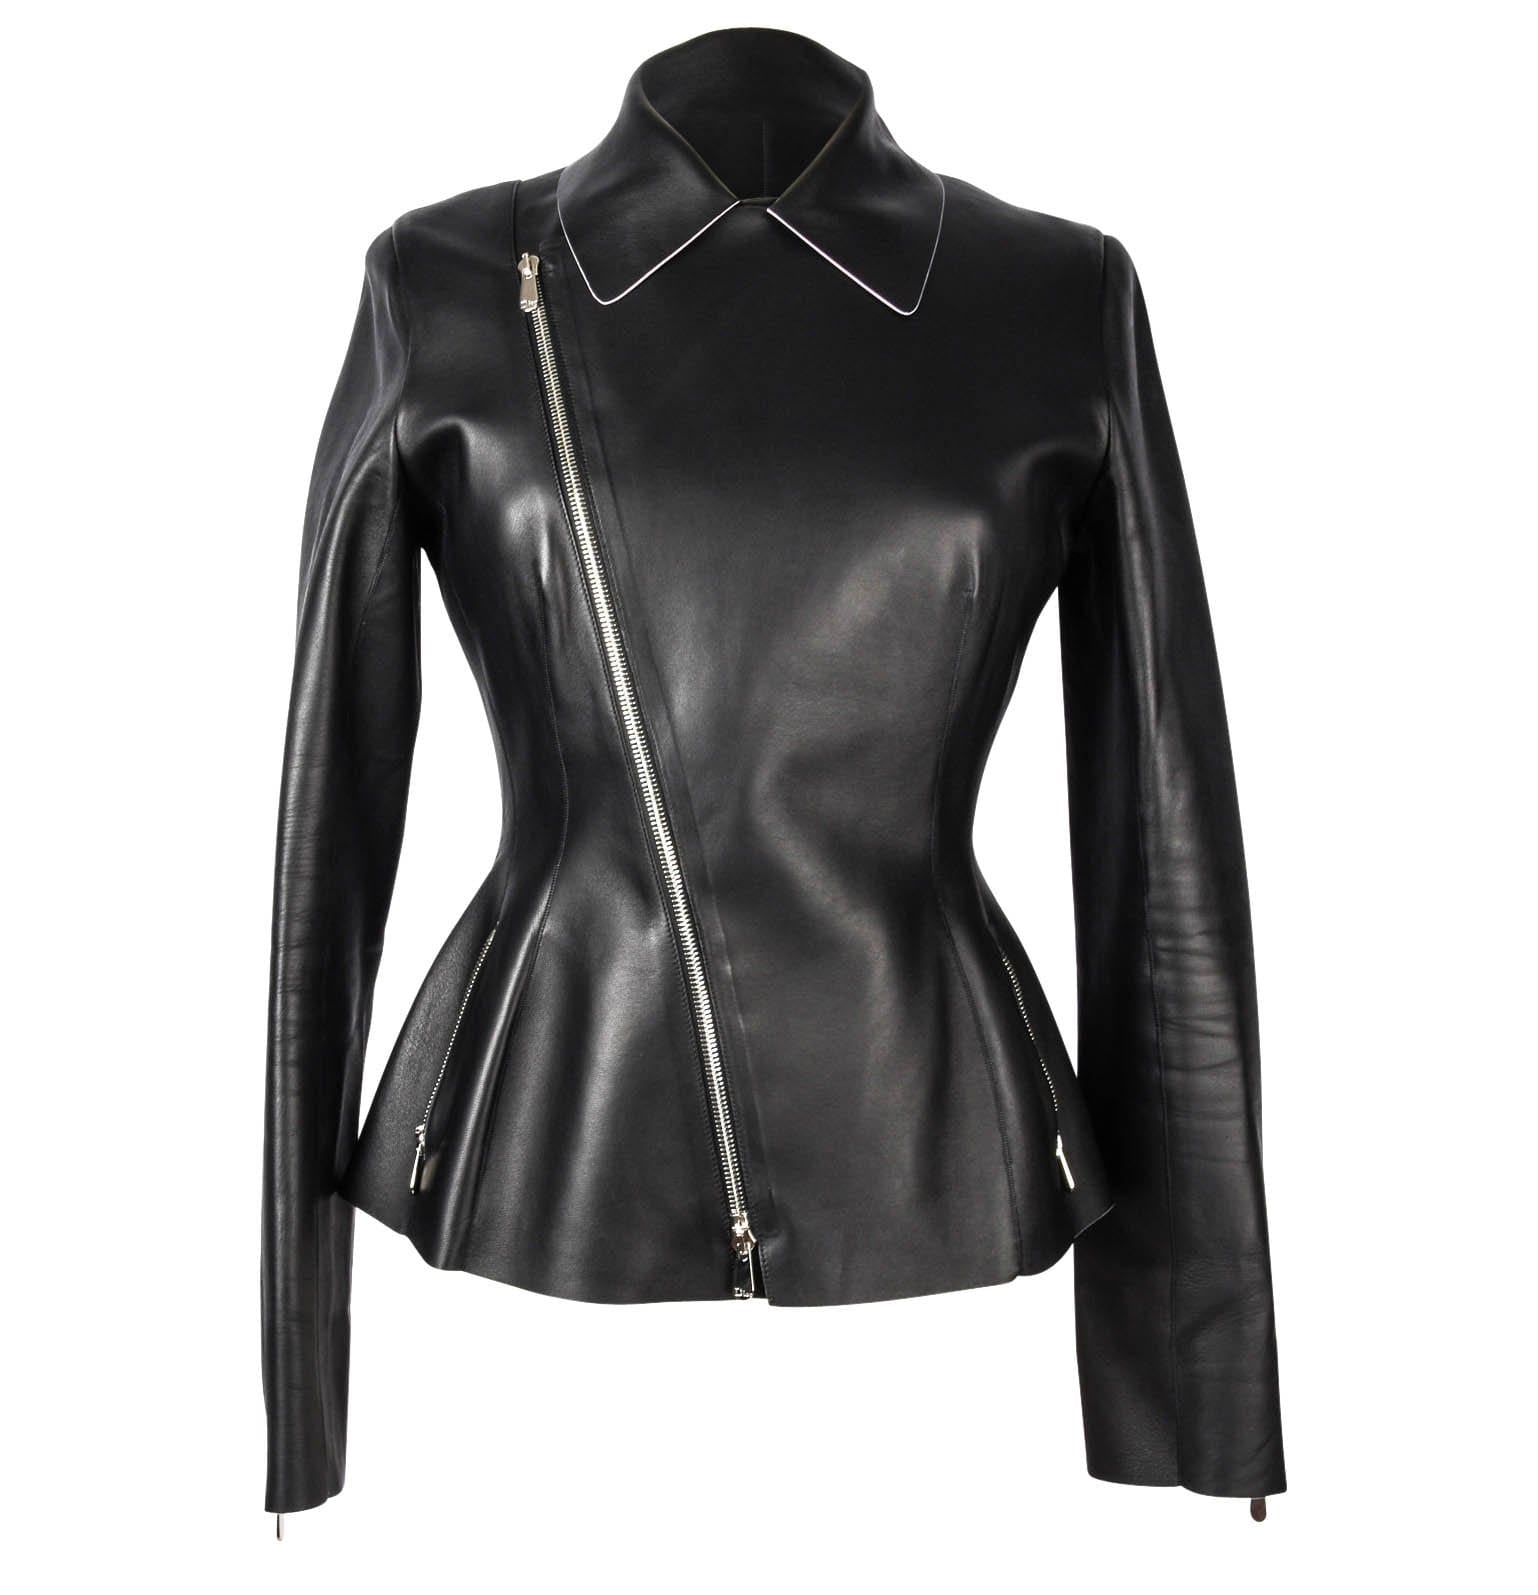 Christian Dior Jacket Black Lambskin Leather Subtle Pink Piping Fits 6 ...